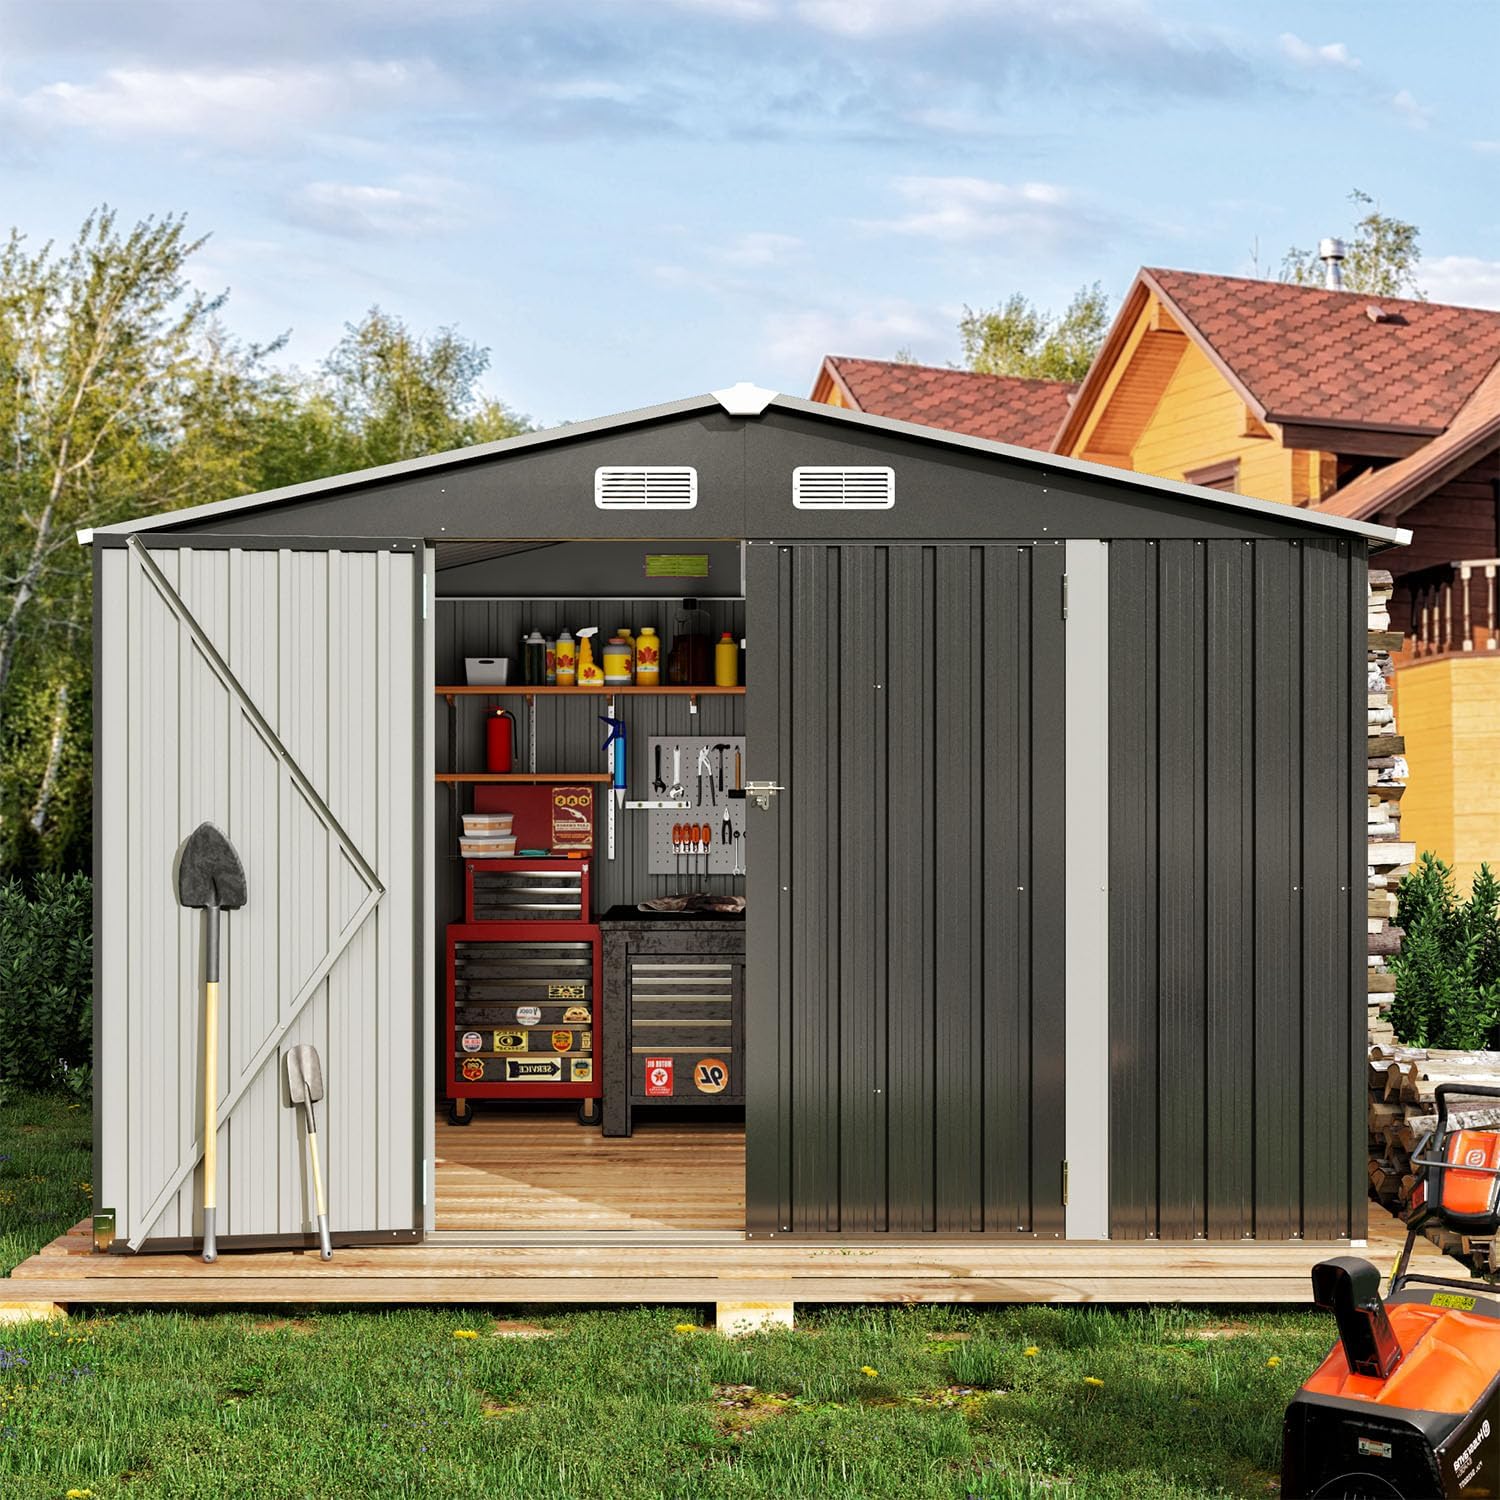 9.6' x 7.8' Metal Utility Tool Shed, Steel Storage Shed with Air Vent & Lockable Doors, Black